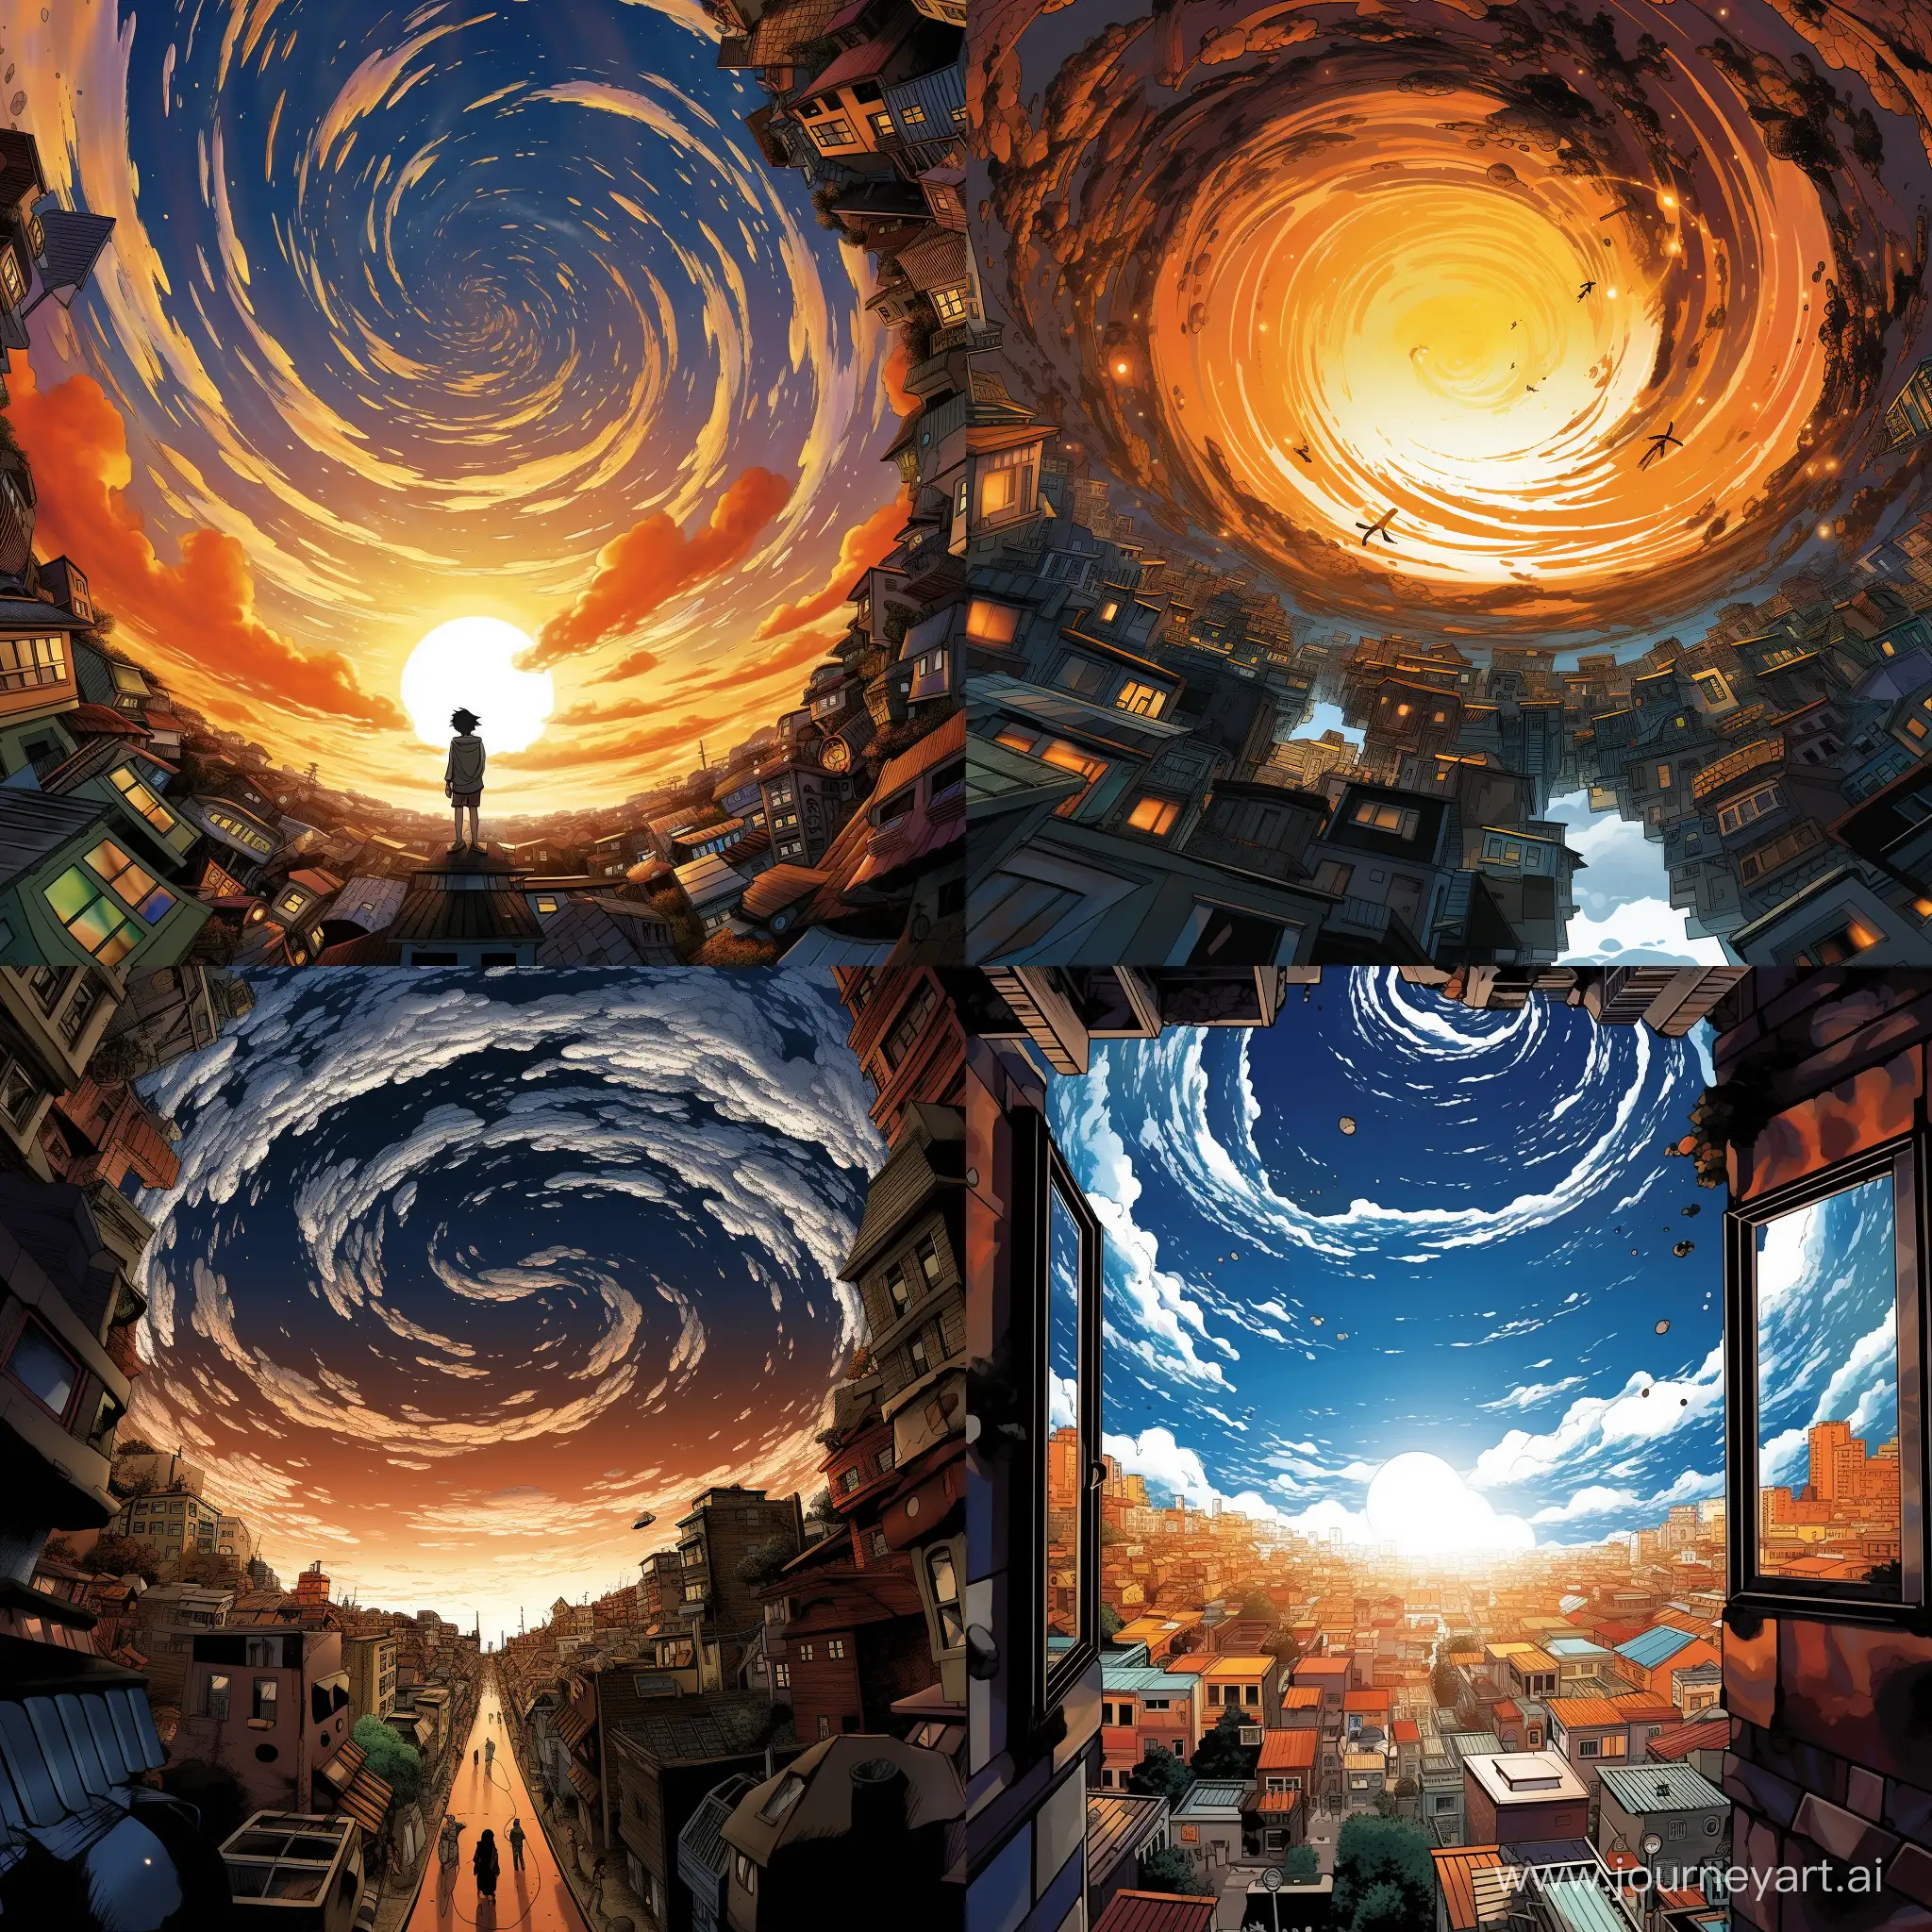 Manga panel, best quality, a swirling vortex rising into the sky, buildings are being sucked into the vortex, windows and people are floating in the vortex